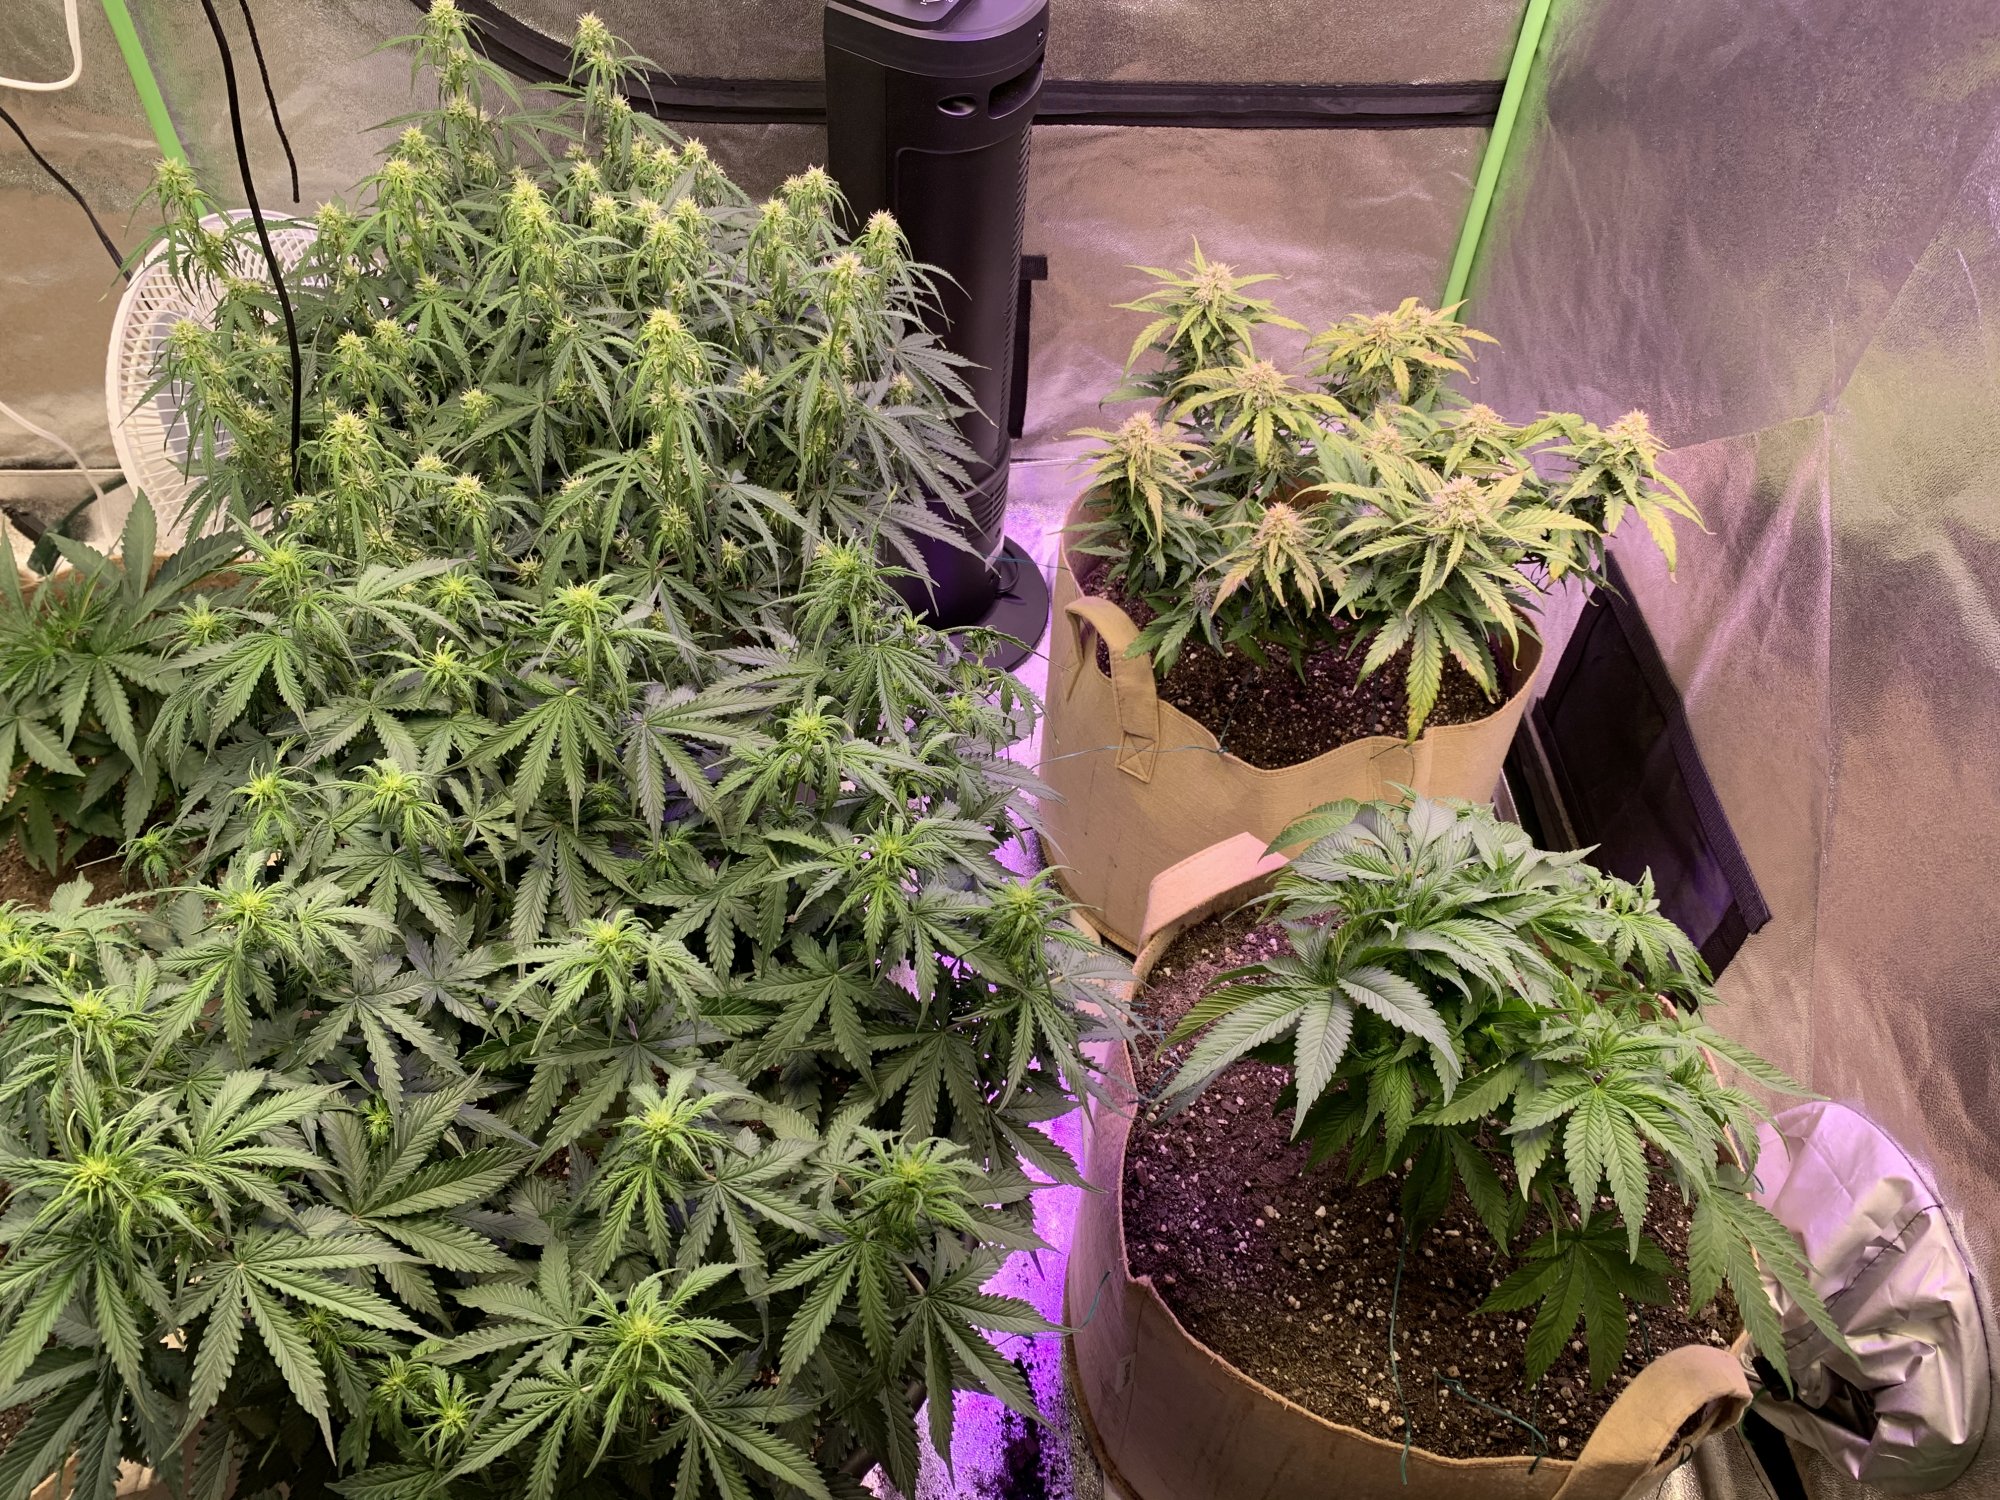 New grower using hlg quantum boards 3